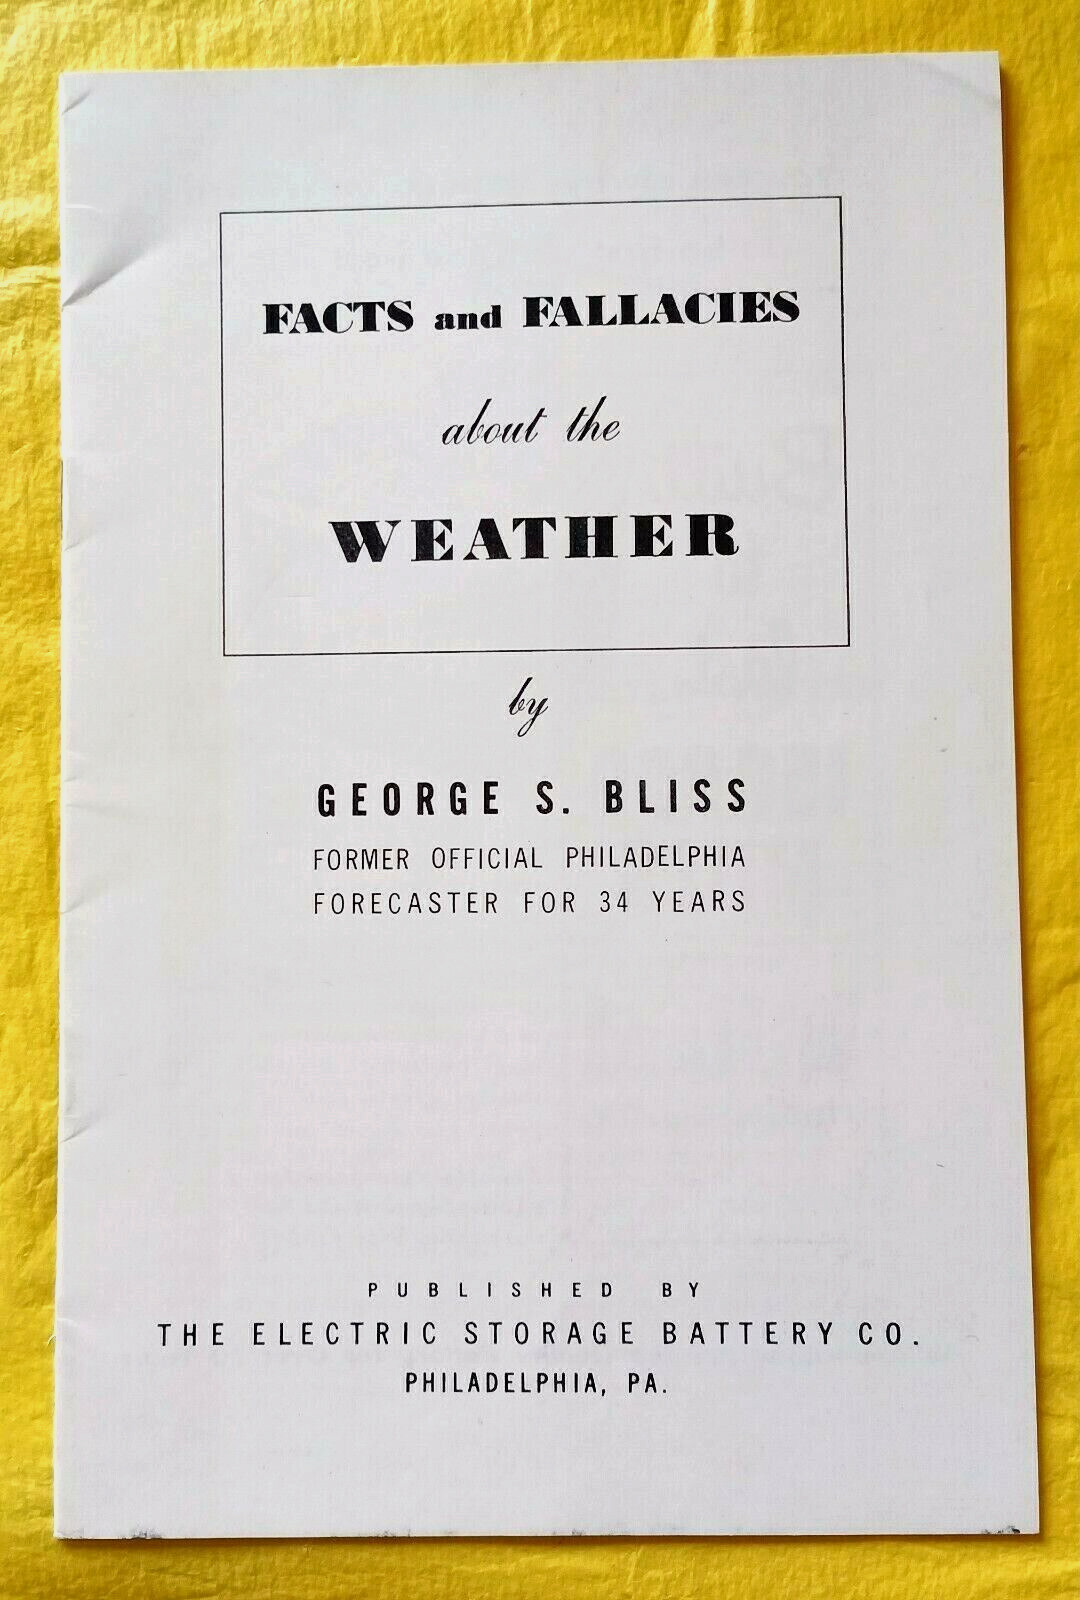 WEATHER FACTS AND FALLACIES G. Bliss BOOKLET Electrical Storage Battery Co. 1955